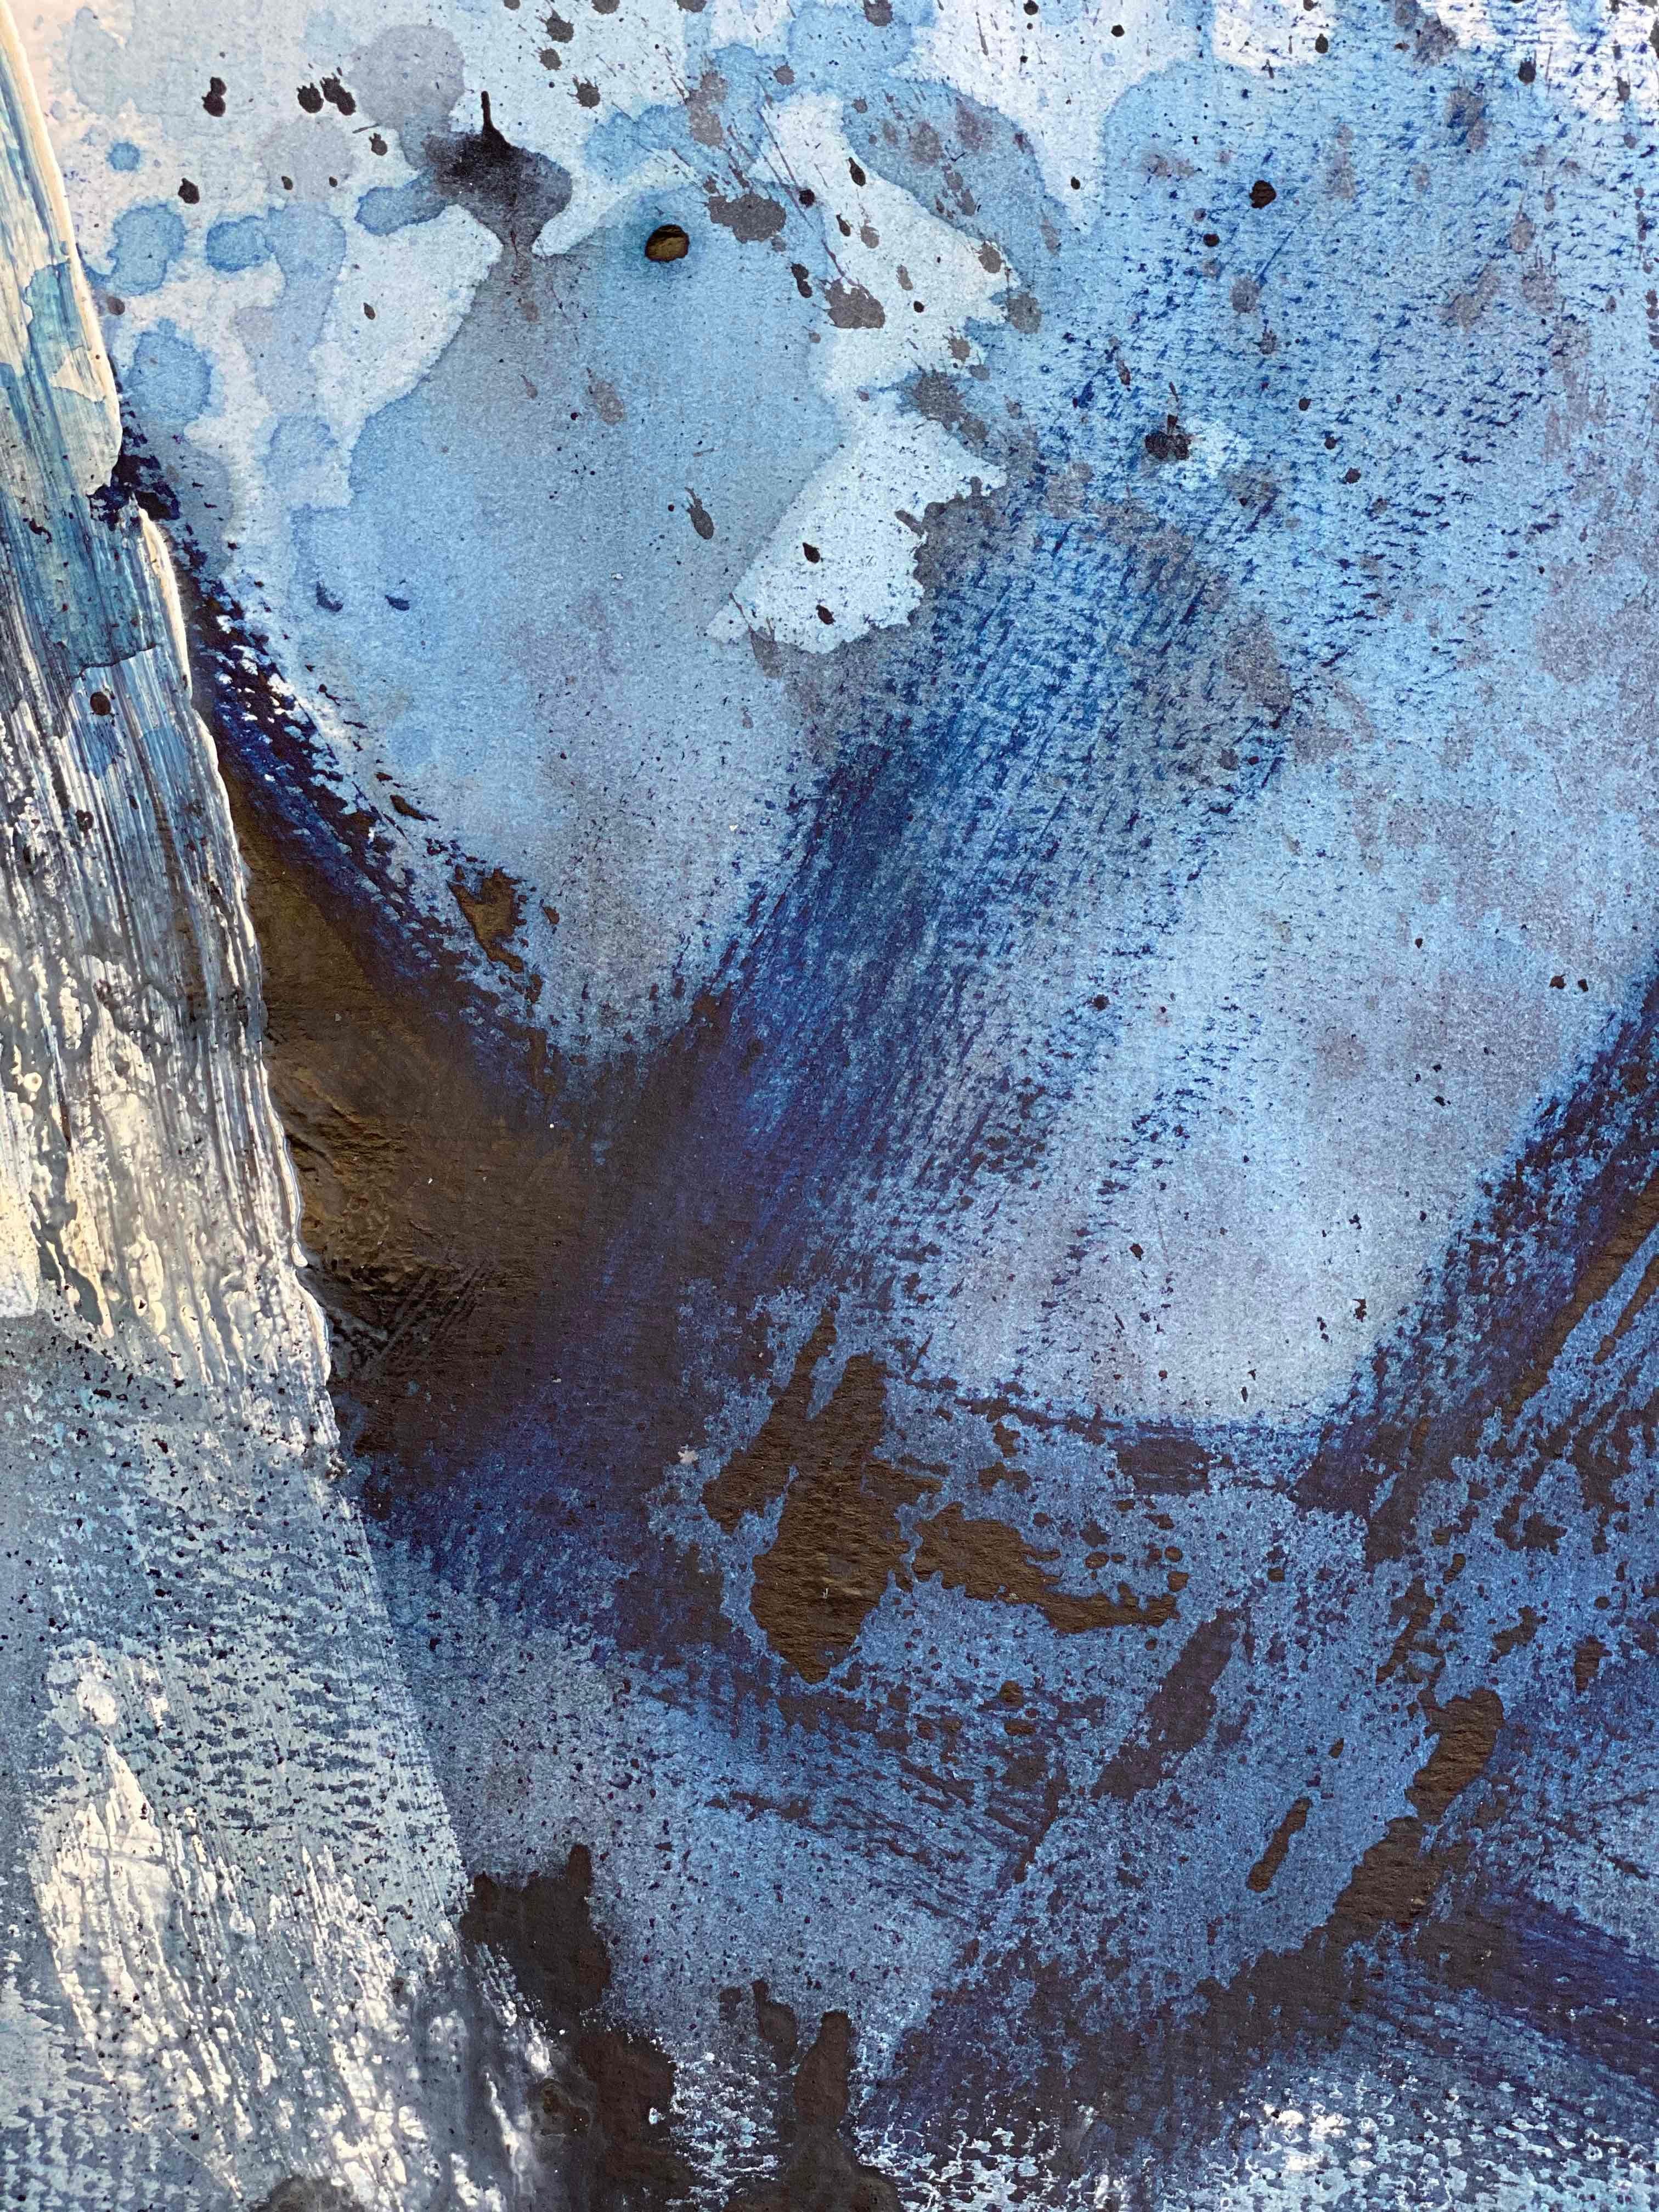 Dramatic elegance, depth and a moody beauty. An original abstract painting on archival paper in classic blue and white, rich in descriptive mark making, textures and details.  A strikingly unique artwork painted on high quality heavy duty